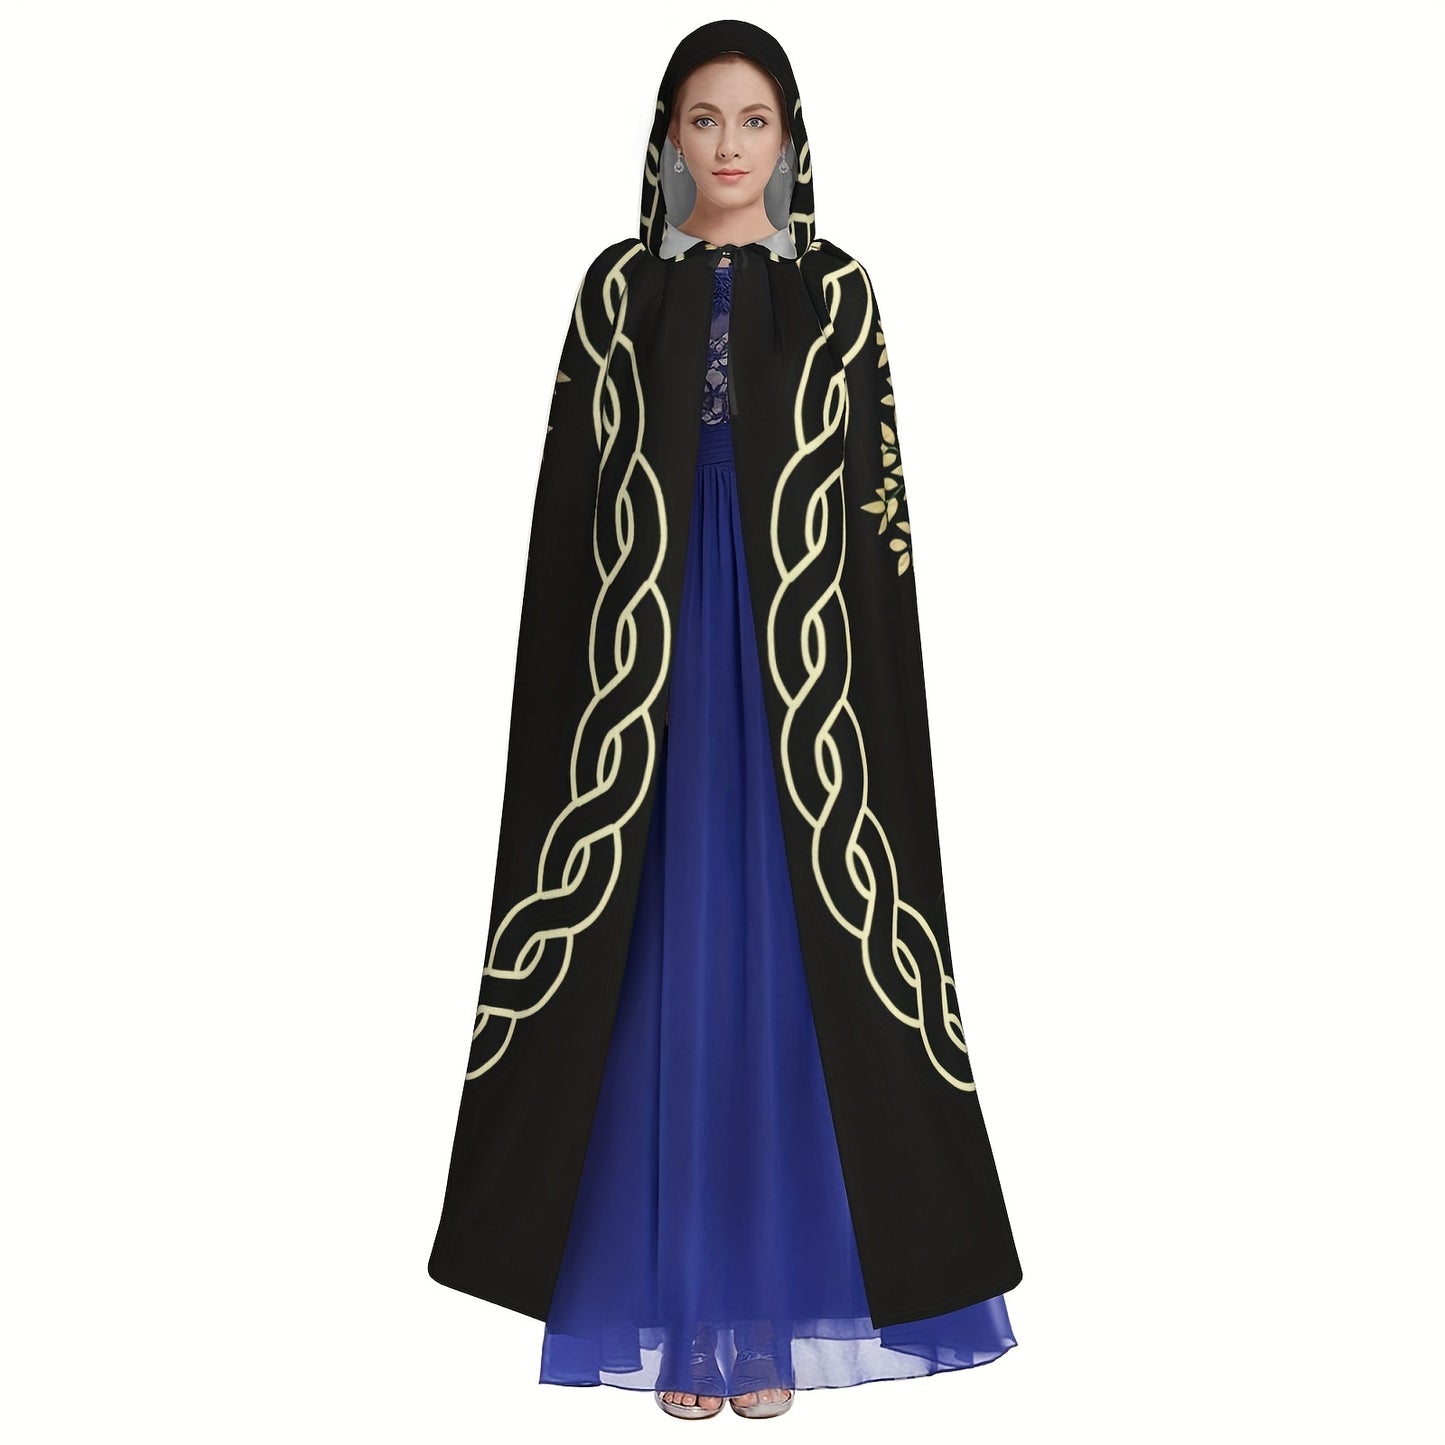 A person stands wearing a vintage black Maramalive™ 1pc, Nordic Style Viking Goddess Wiccan Wicca Halloween Wizard Witch Hooded Robe Cloak Christmas Hoodies Cape Cosplay For Adult Men Women Party Favors Supplies Dresses Clothes Gifts Costume with gold-patterned trim over a blue dress.